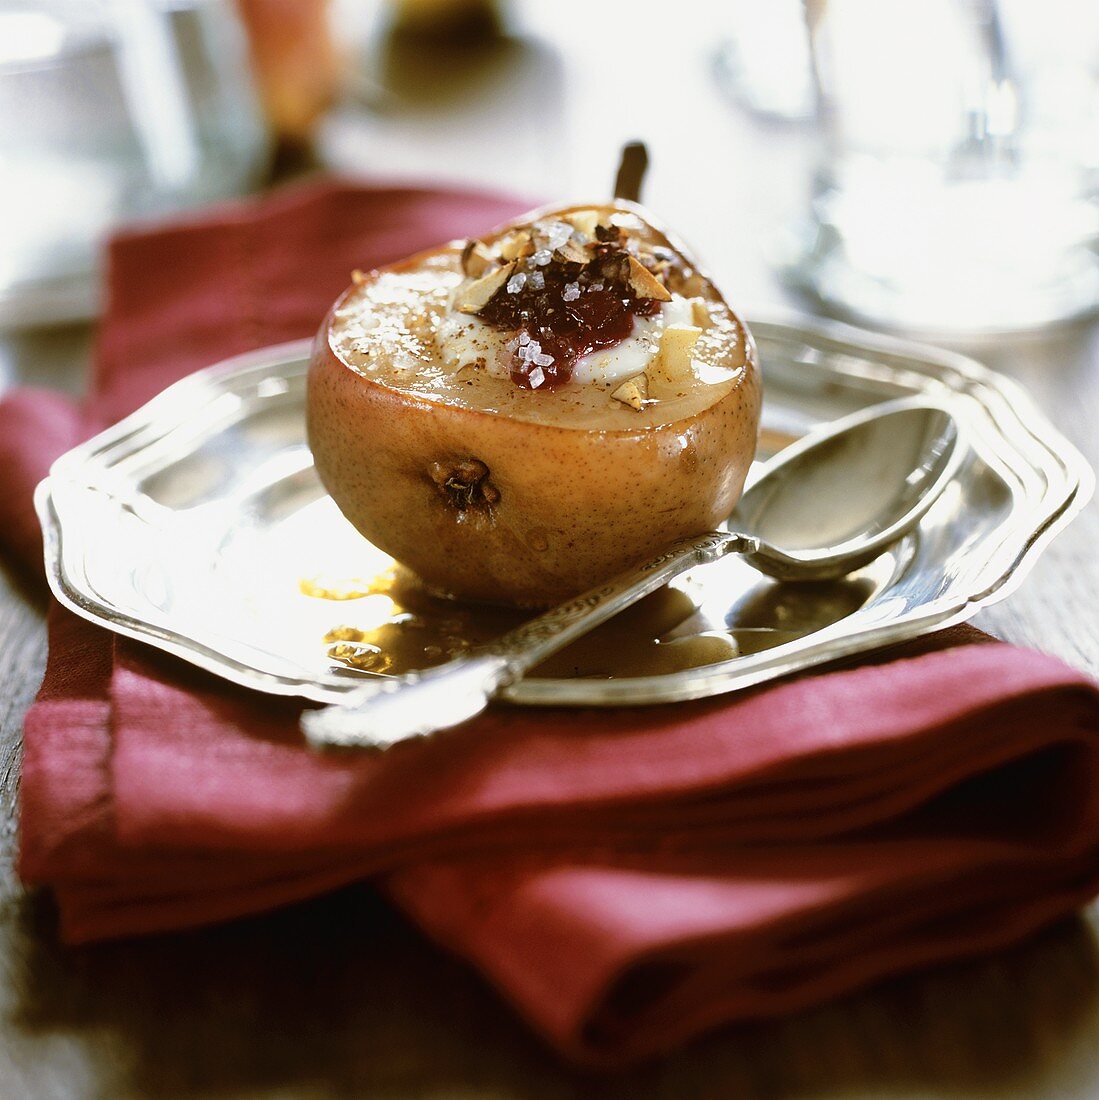 Caramelised pear stuffed with cheese and jam